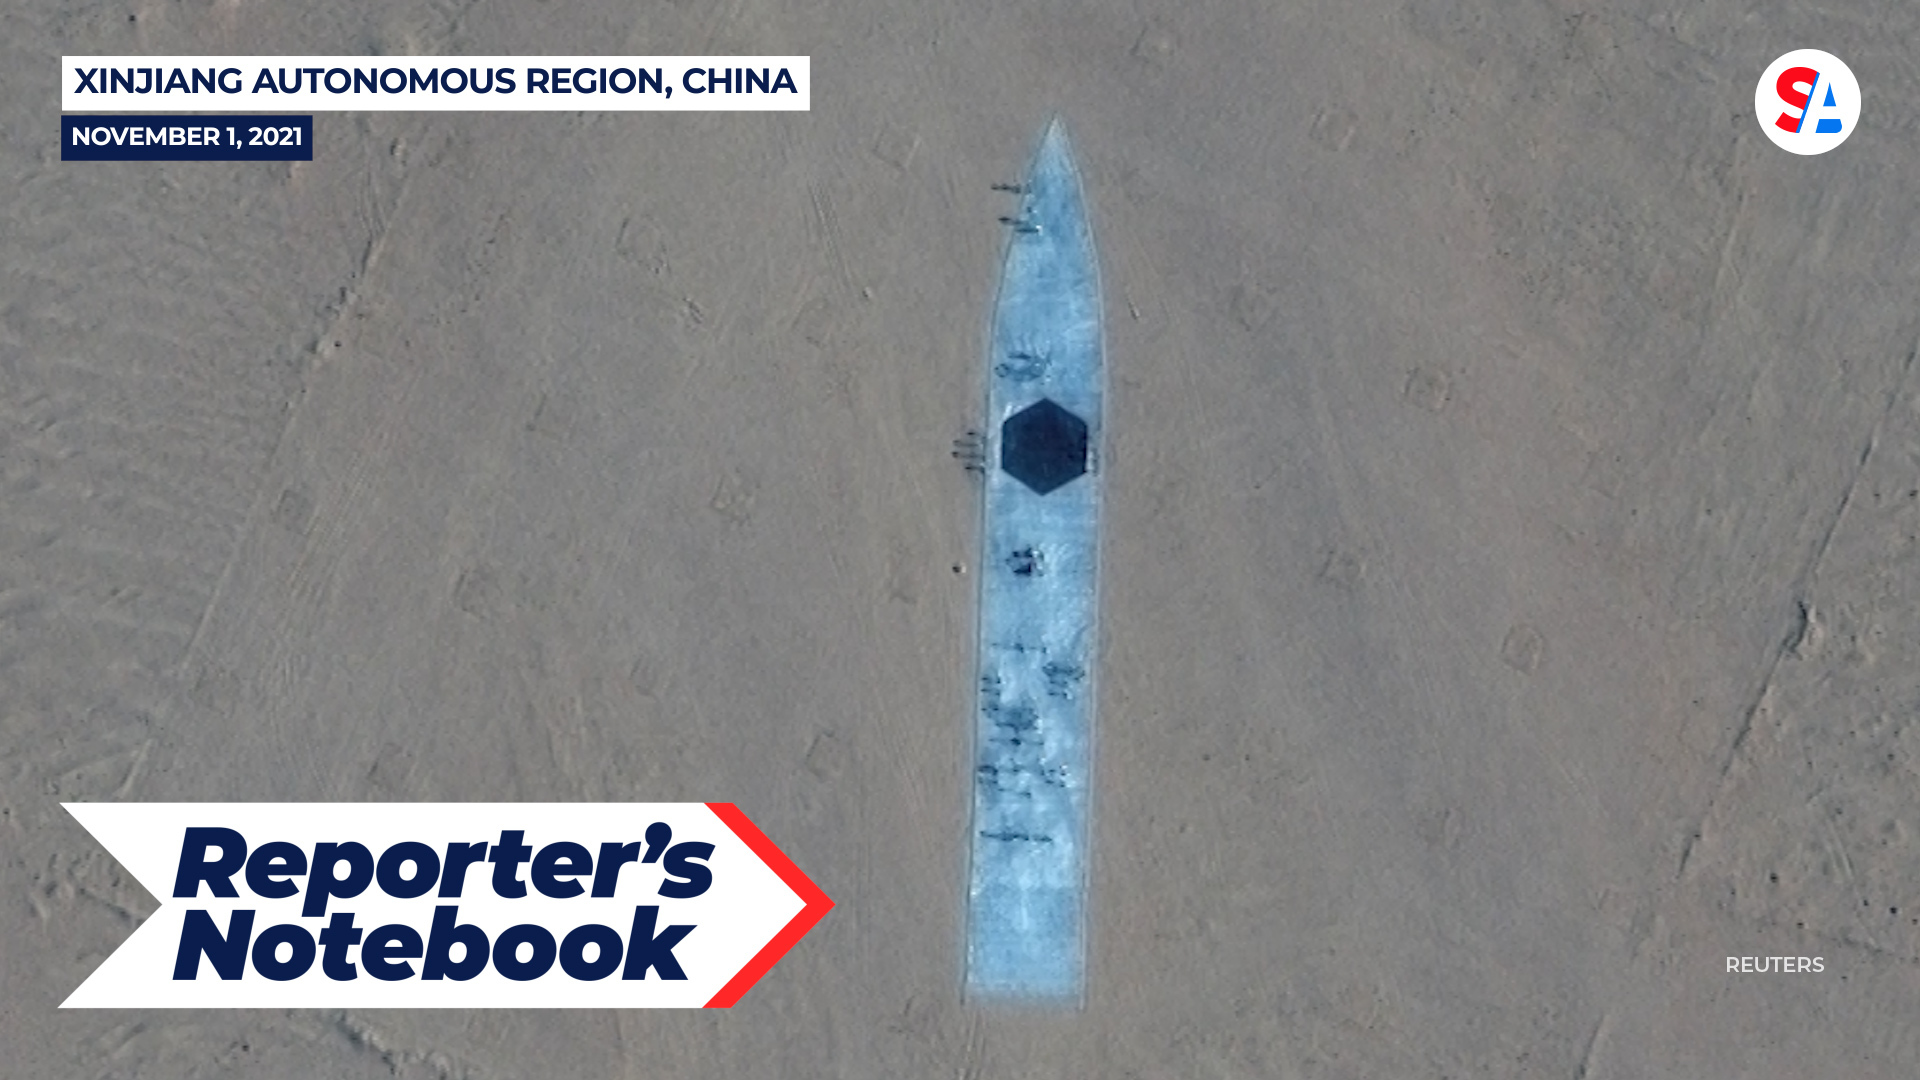 Satellite images revealed China's suspicious mockups of US warships as tension grows between the two countries over Taiwan's independence.